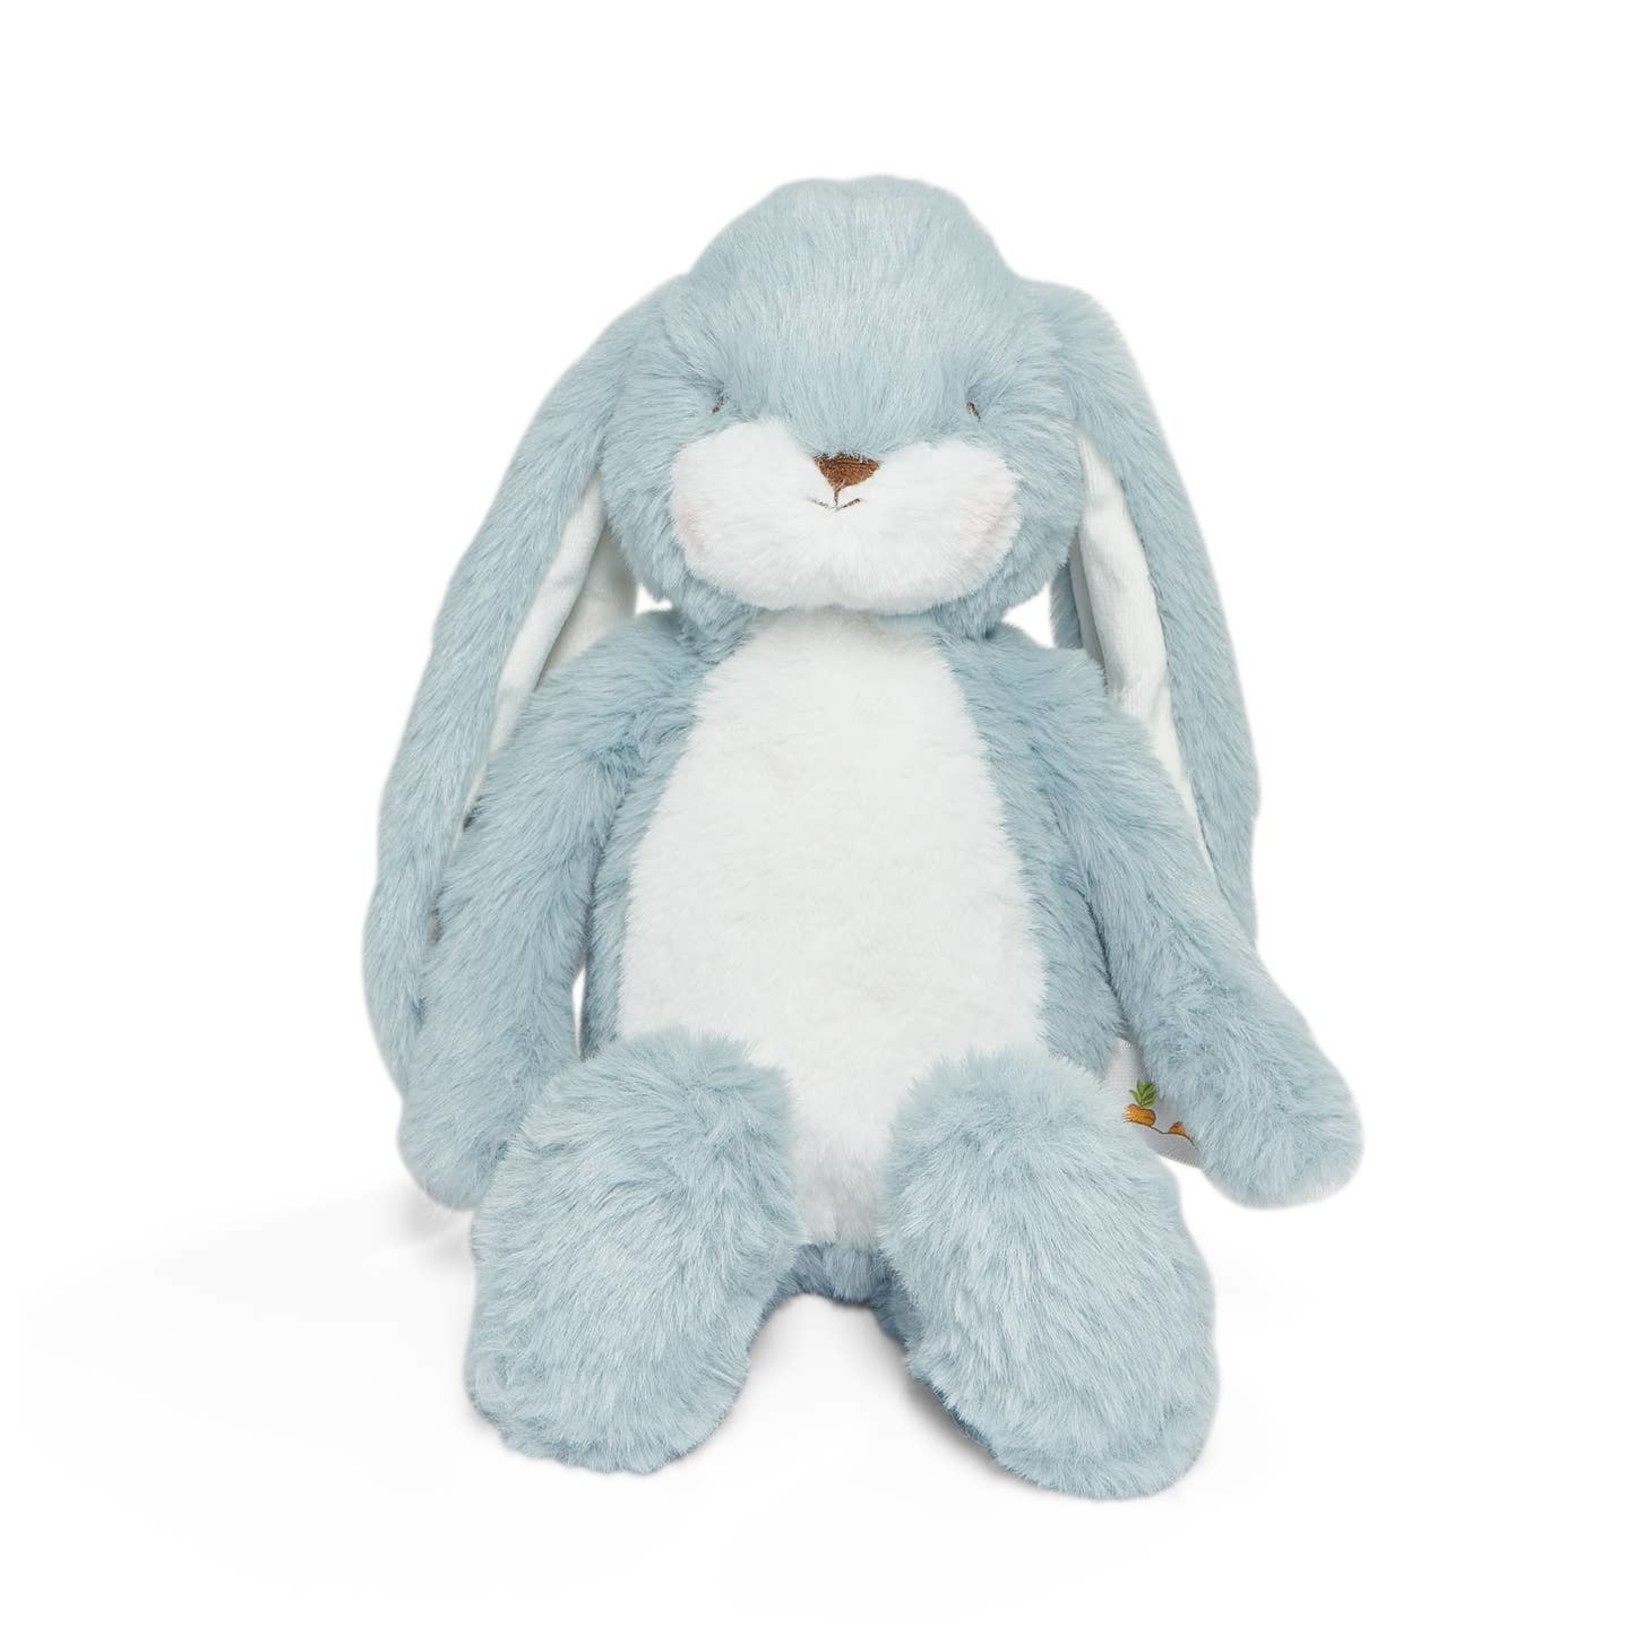 Bunnies By the Bay Little Nibble 12" Floppy Bunny - Stormy Blue x